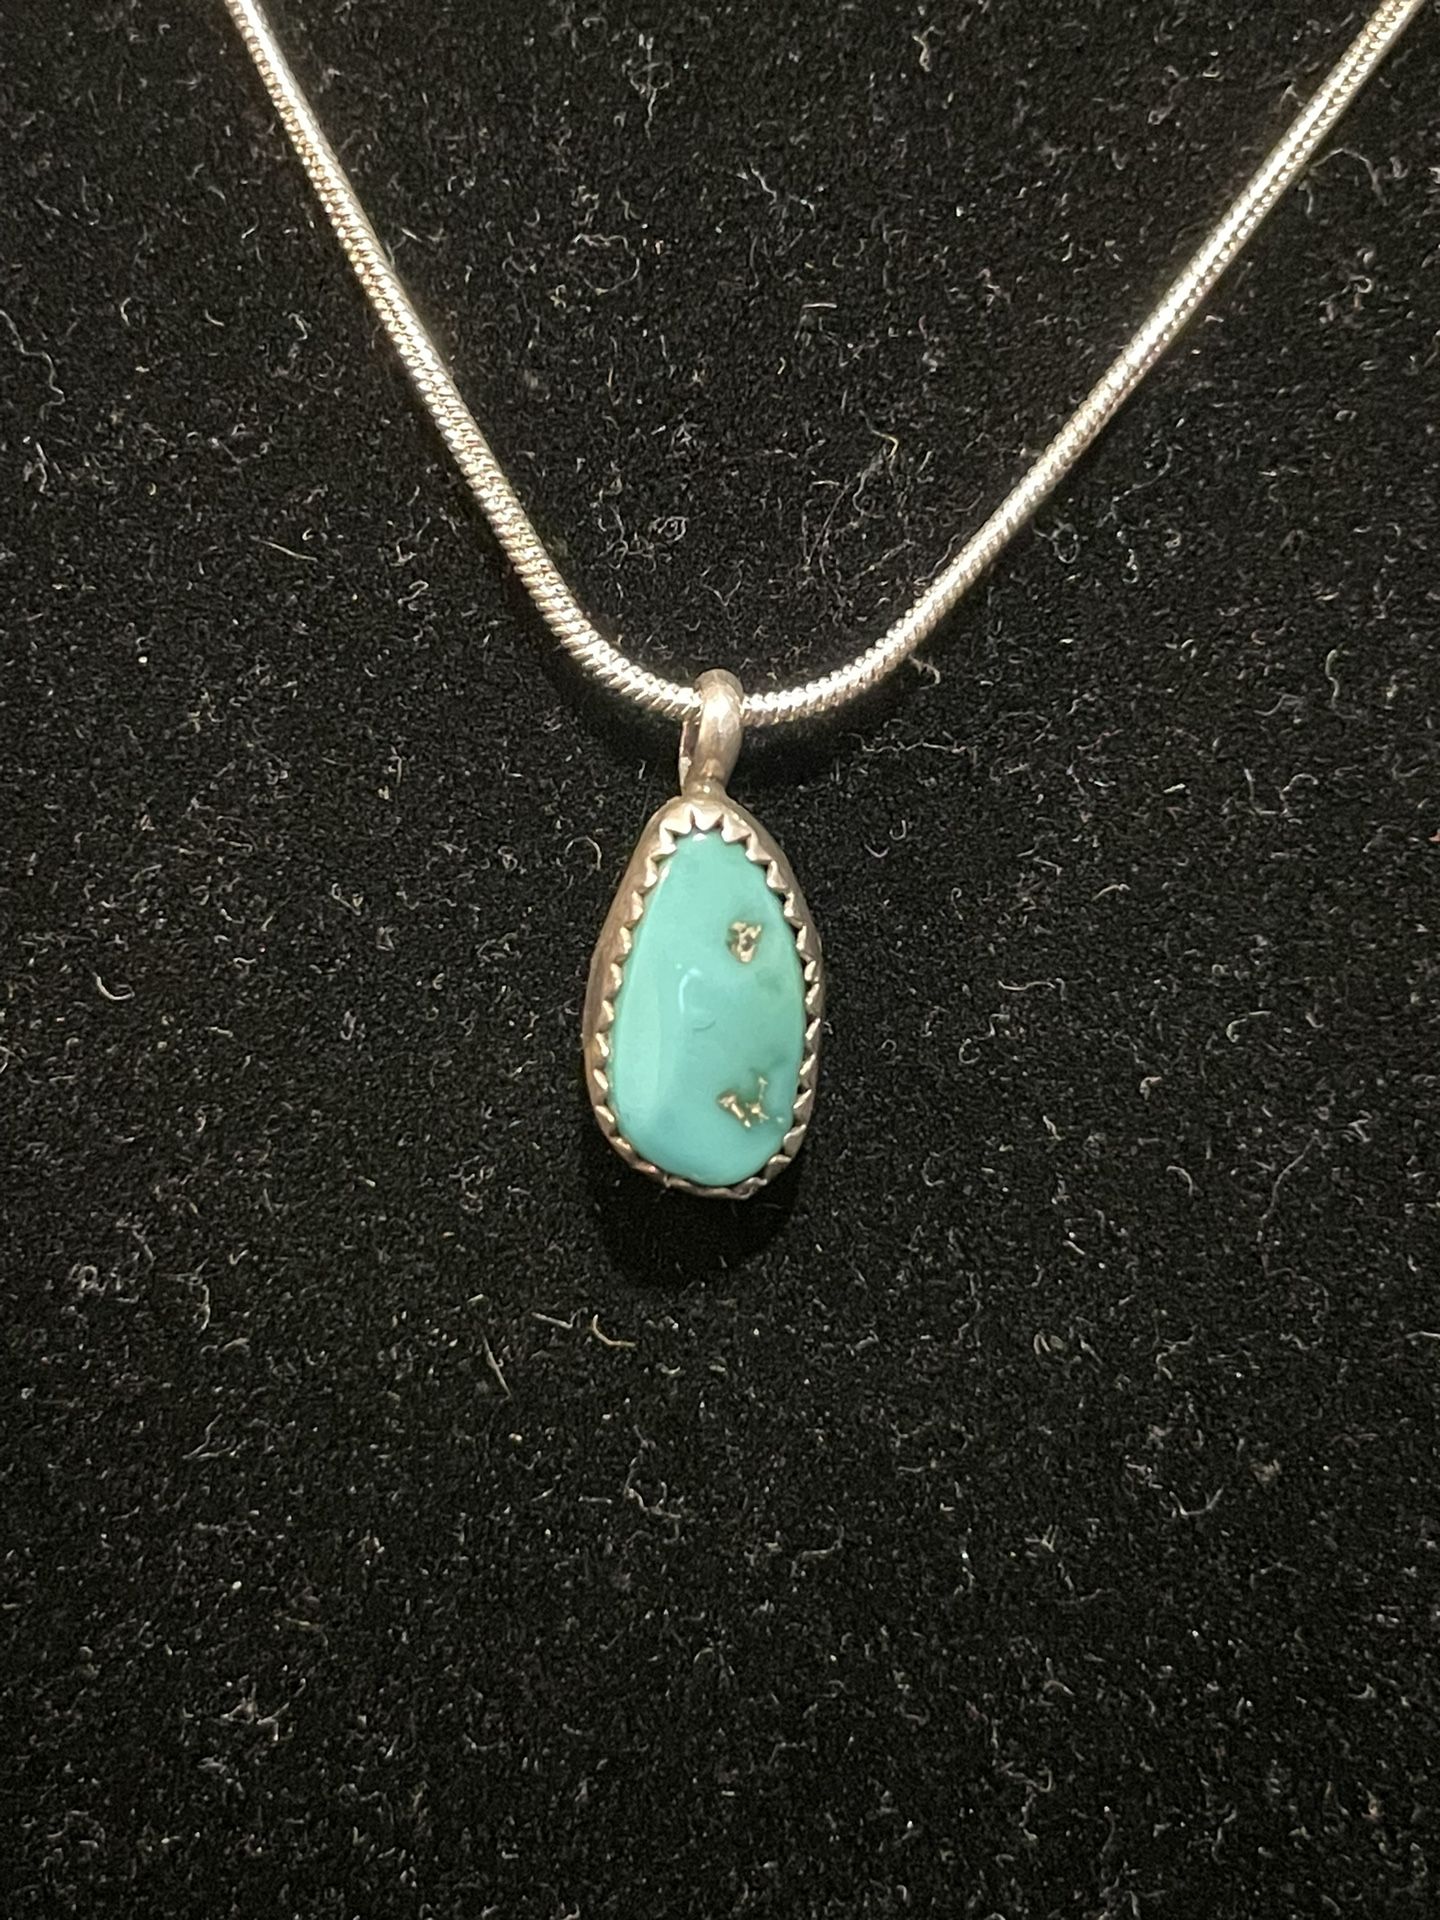 Turquoise necklace. Sterling silver wire wrap necklace.